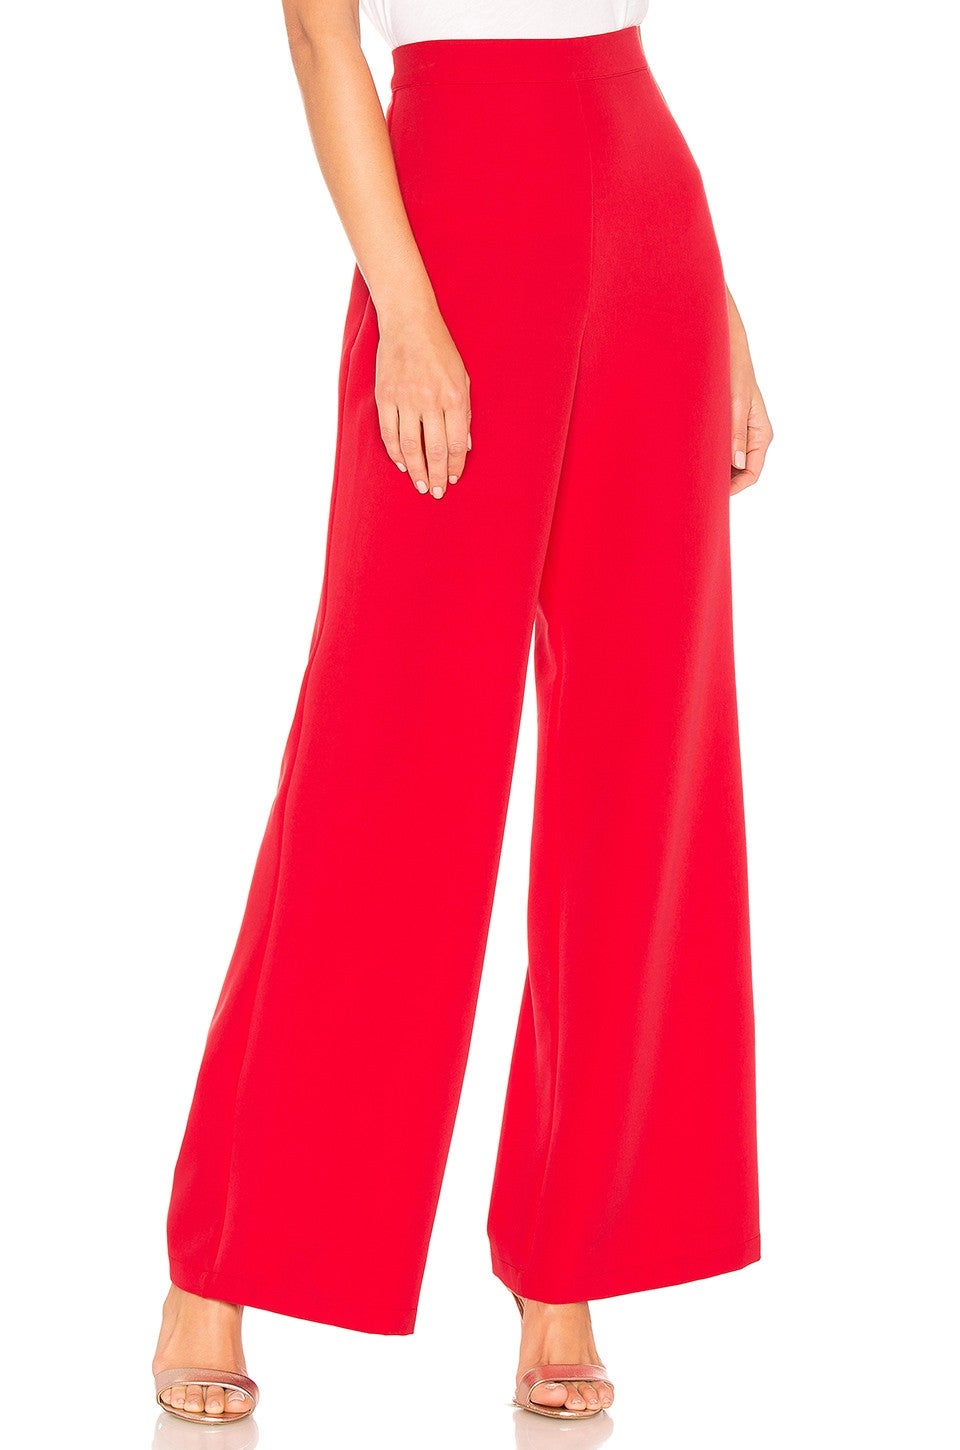 Lovers + Friends red wide leg pant